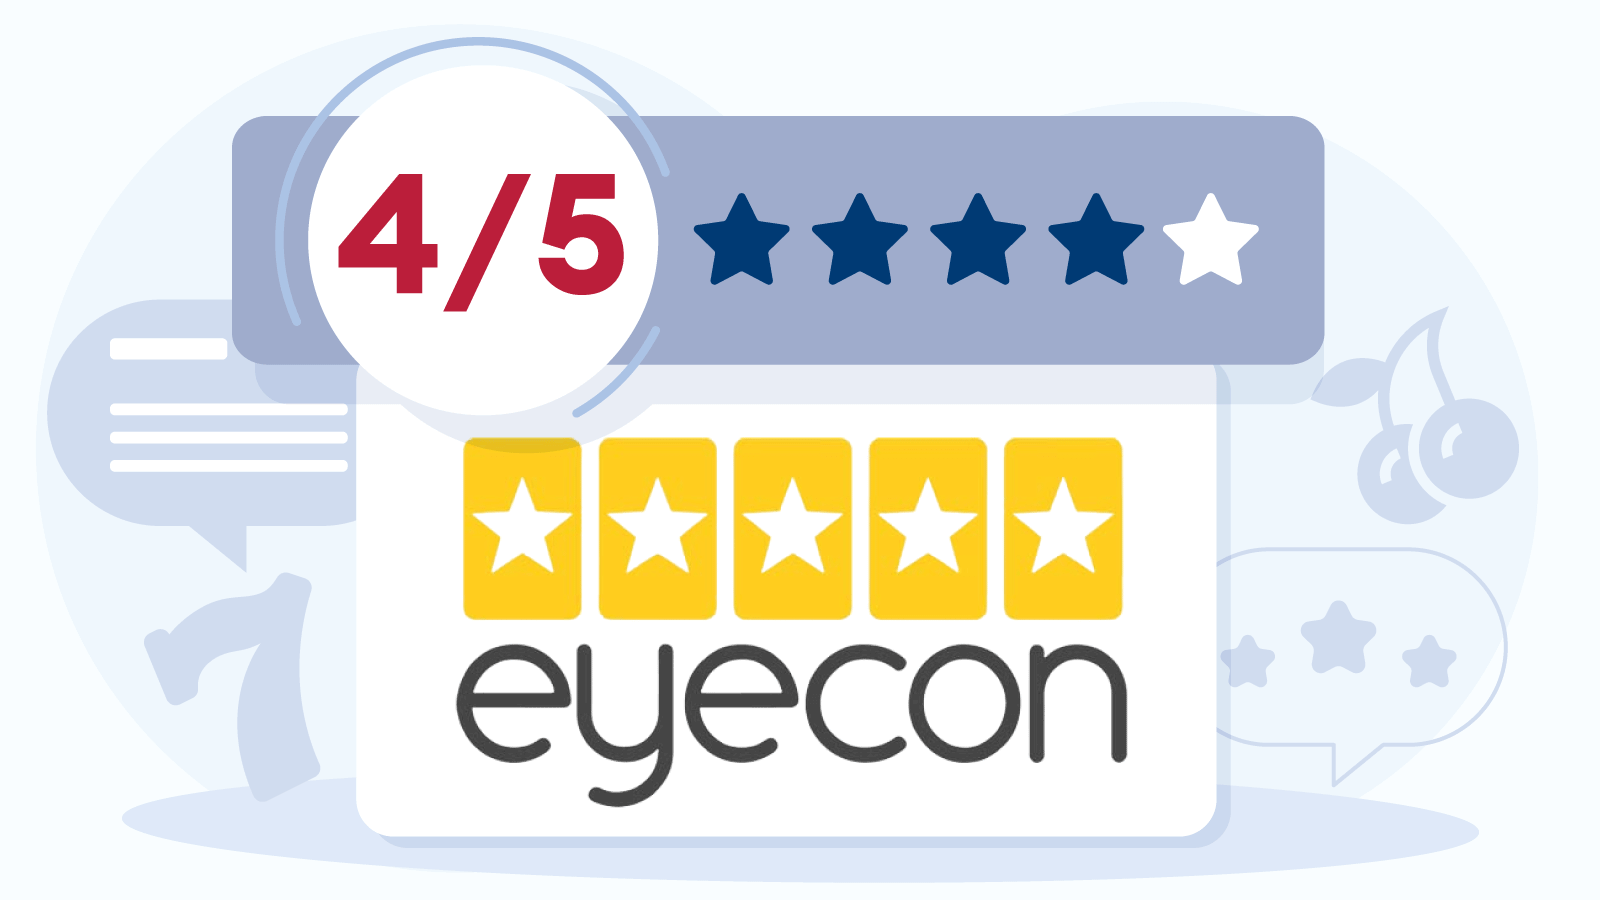 Our Review for Eyecon – 45 Rating